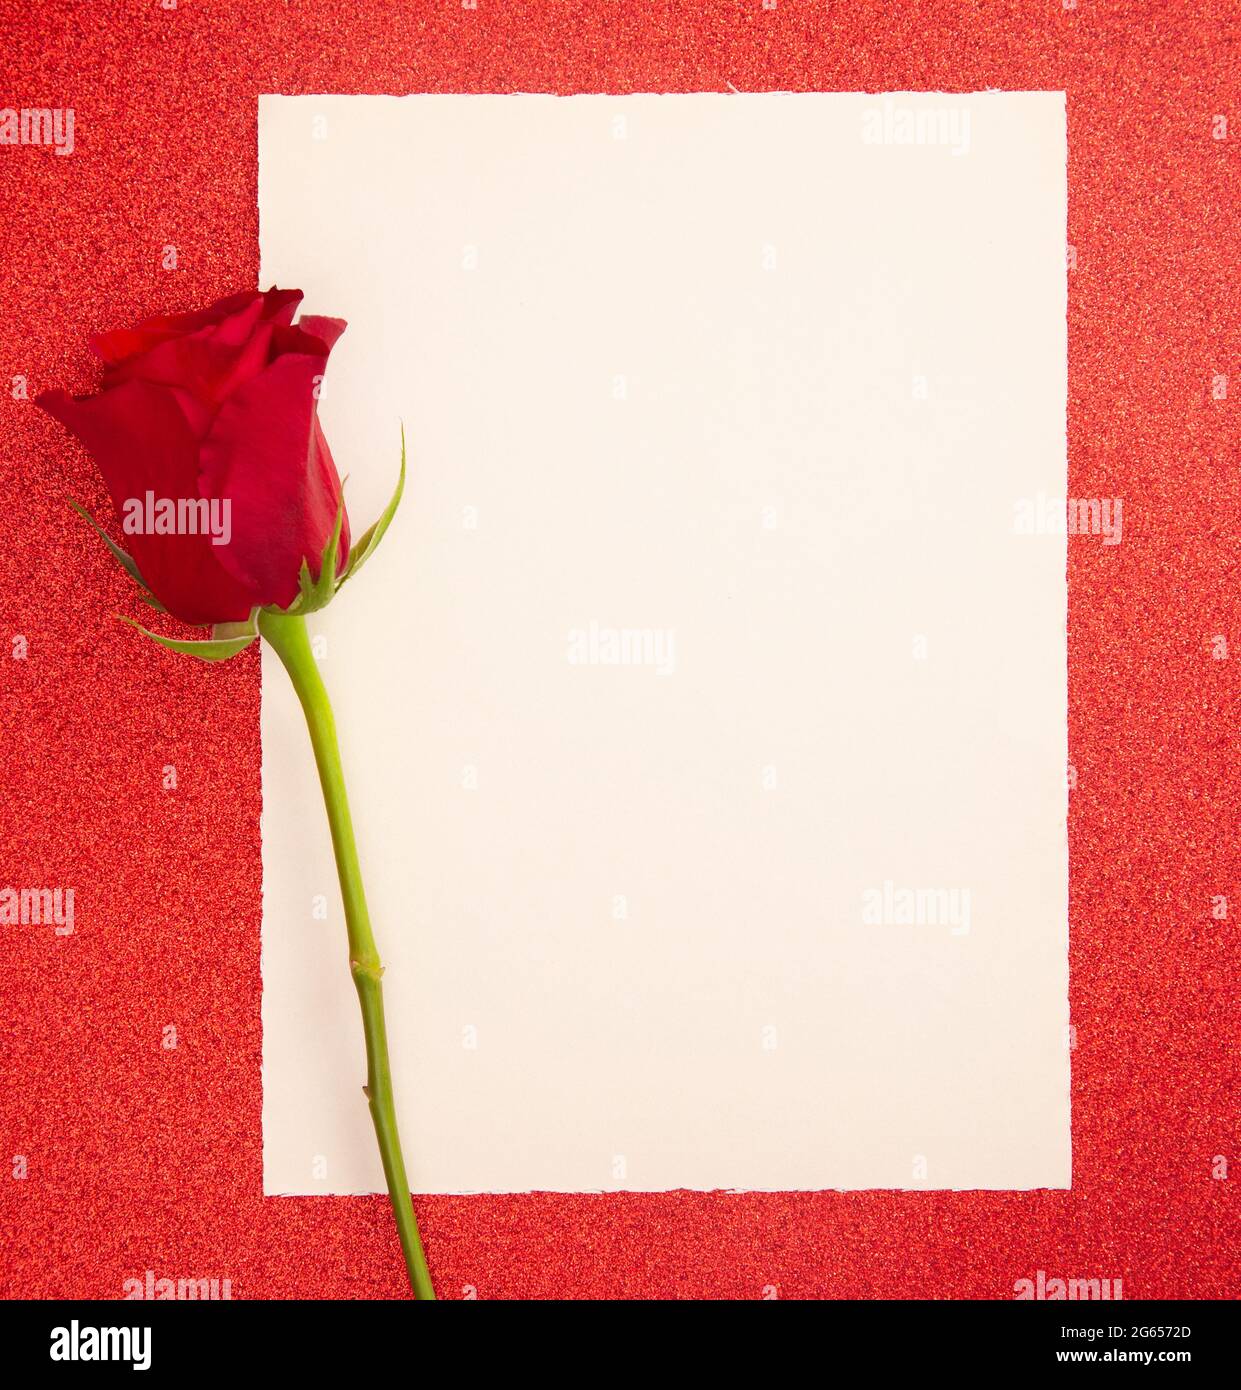 A Single Rose with a Blank Page for Writing a Love Note Stock Photo